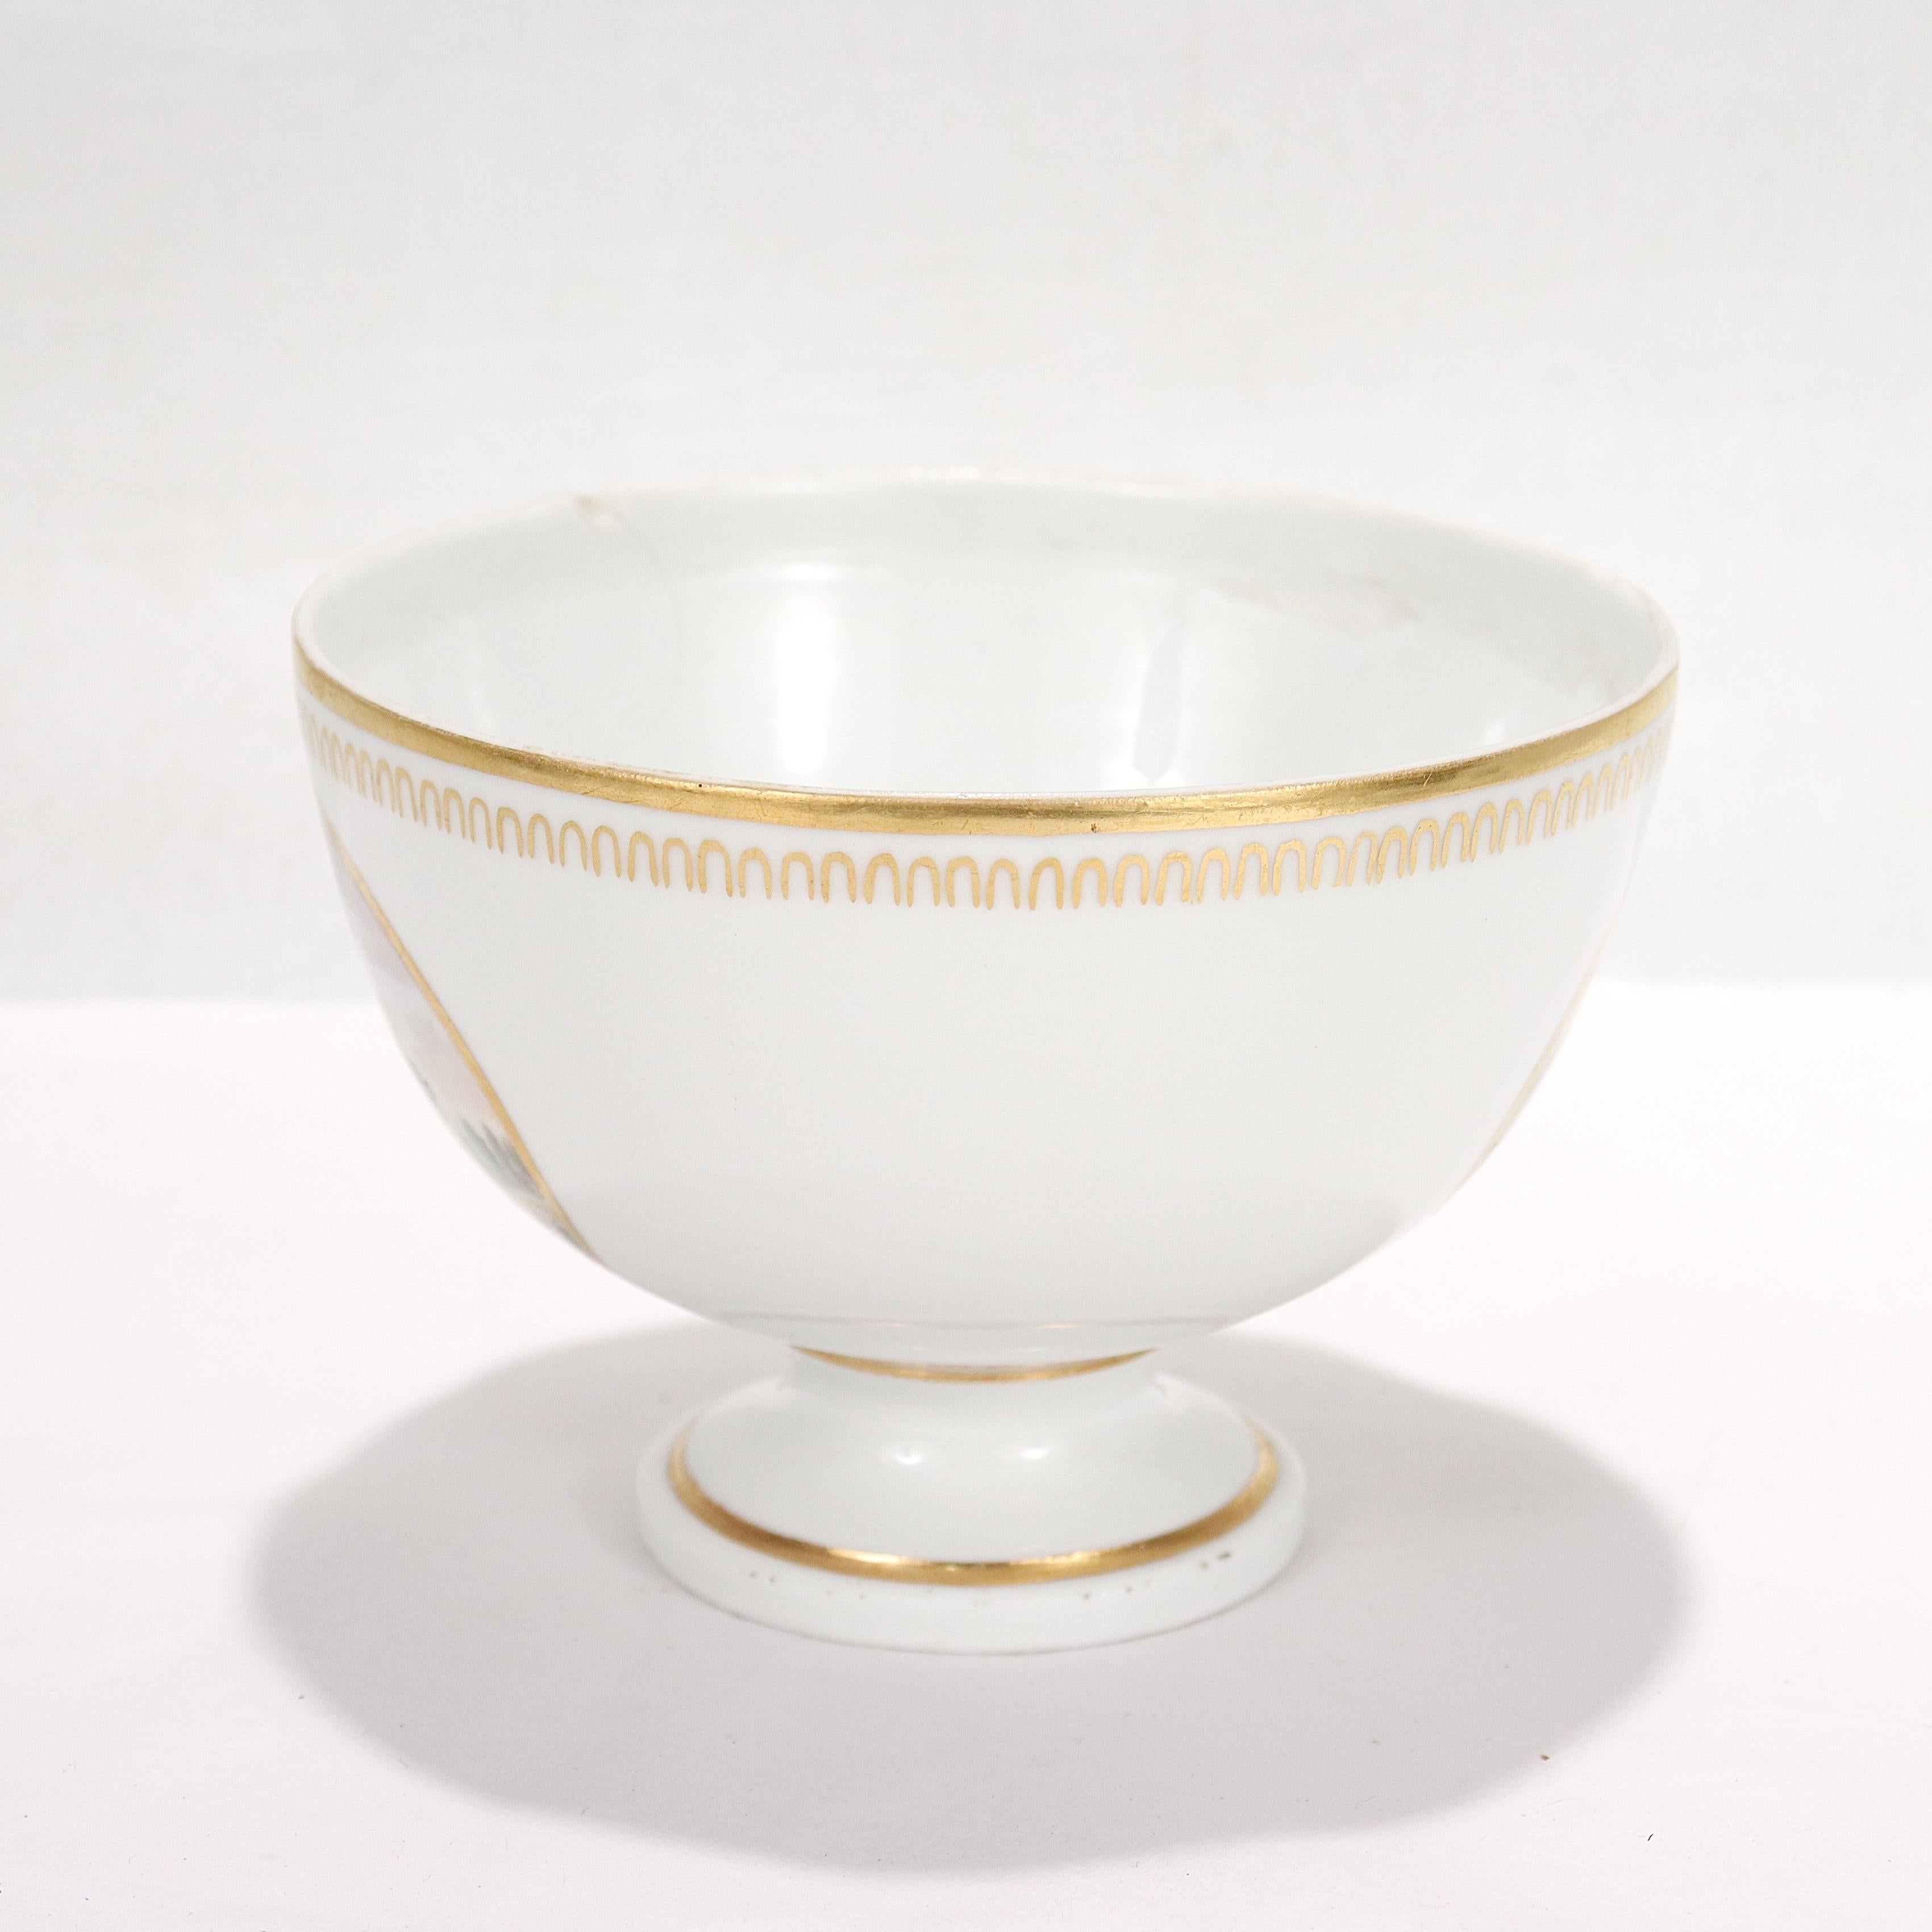 19th Century Antique Doccia Porcelain Italian Neoclassical Topographical Waste Bowl For Sale